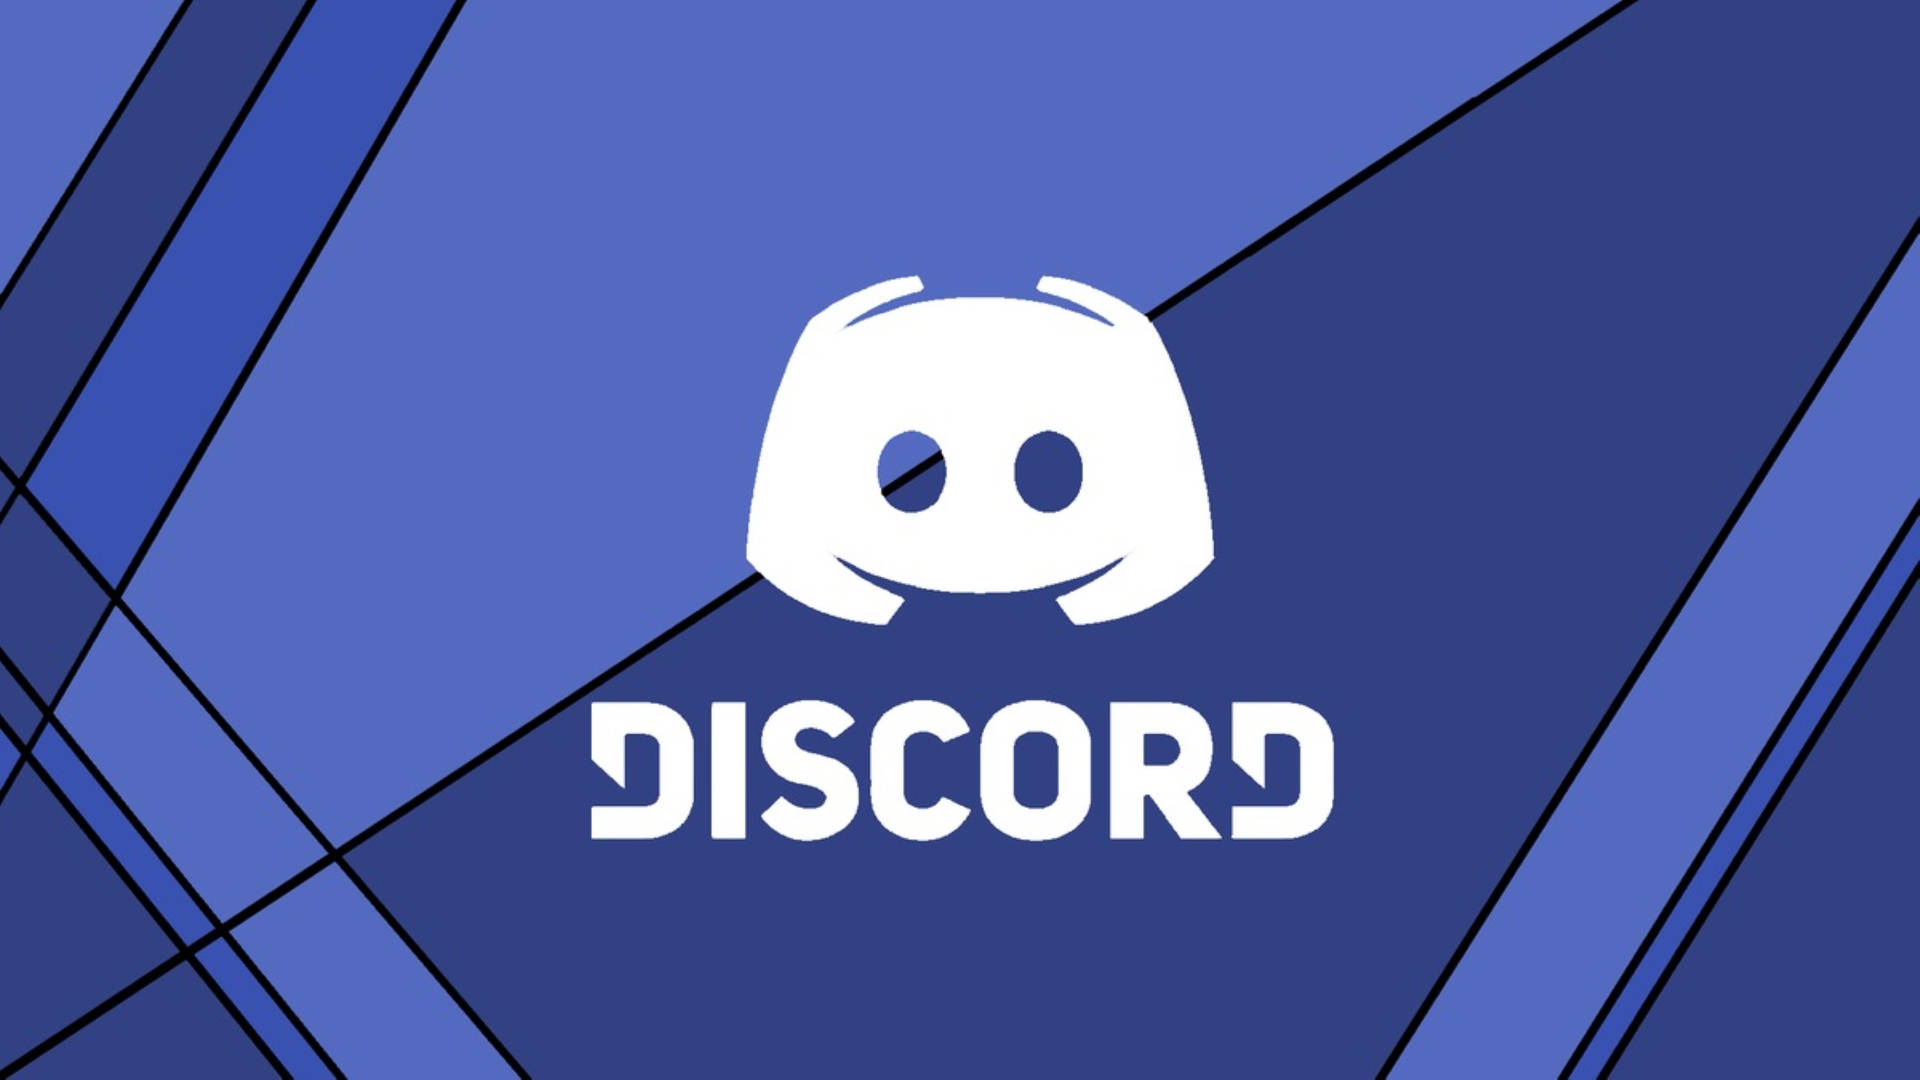 Top 999+ Discord Wallpaper Full HD, 4K✅Free to Use